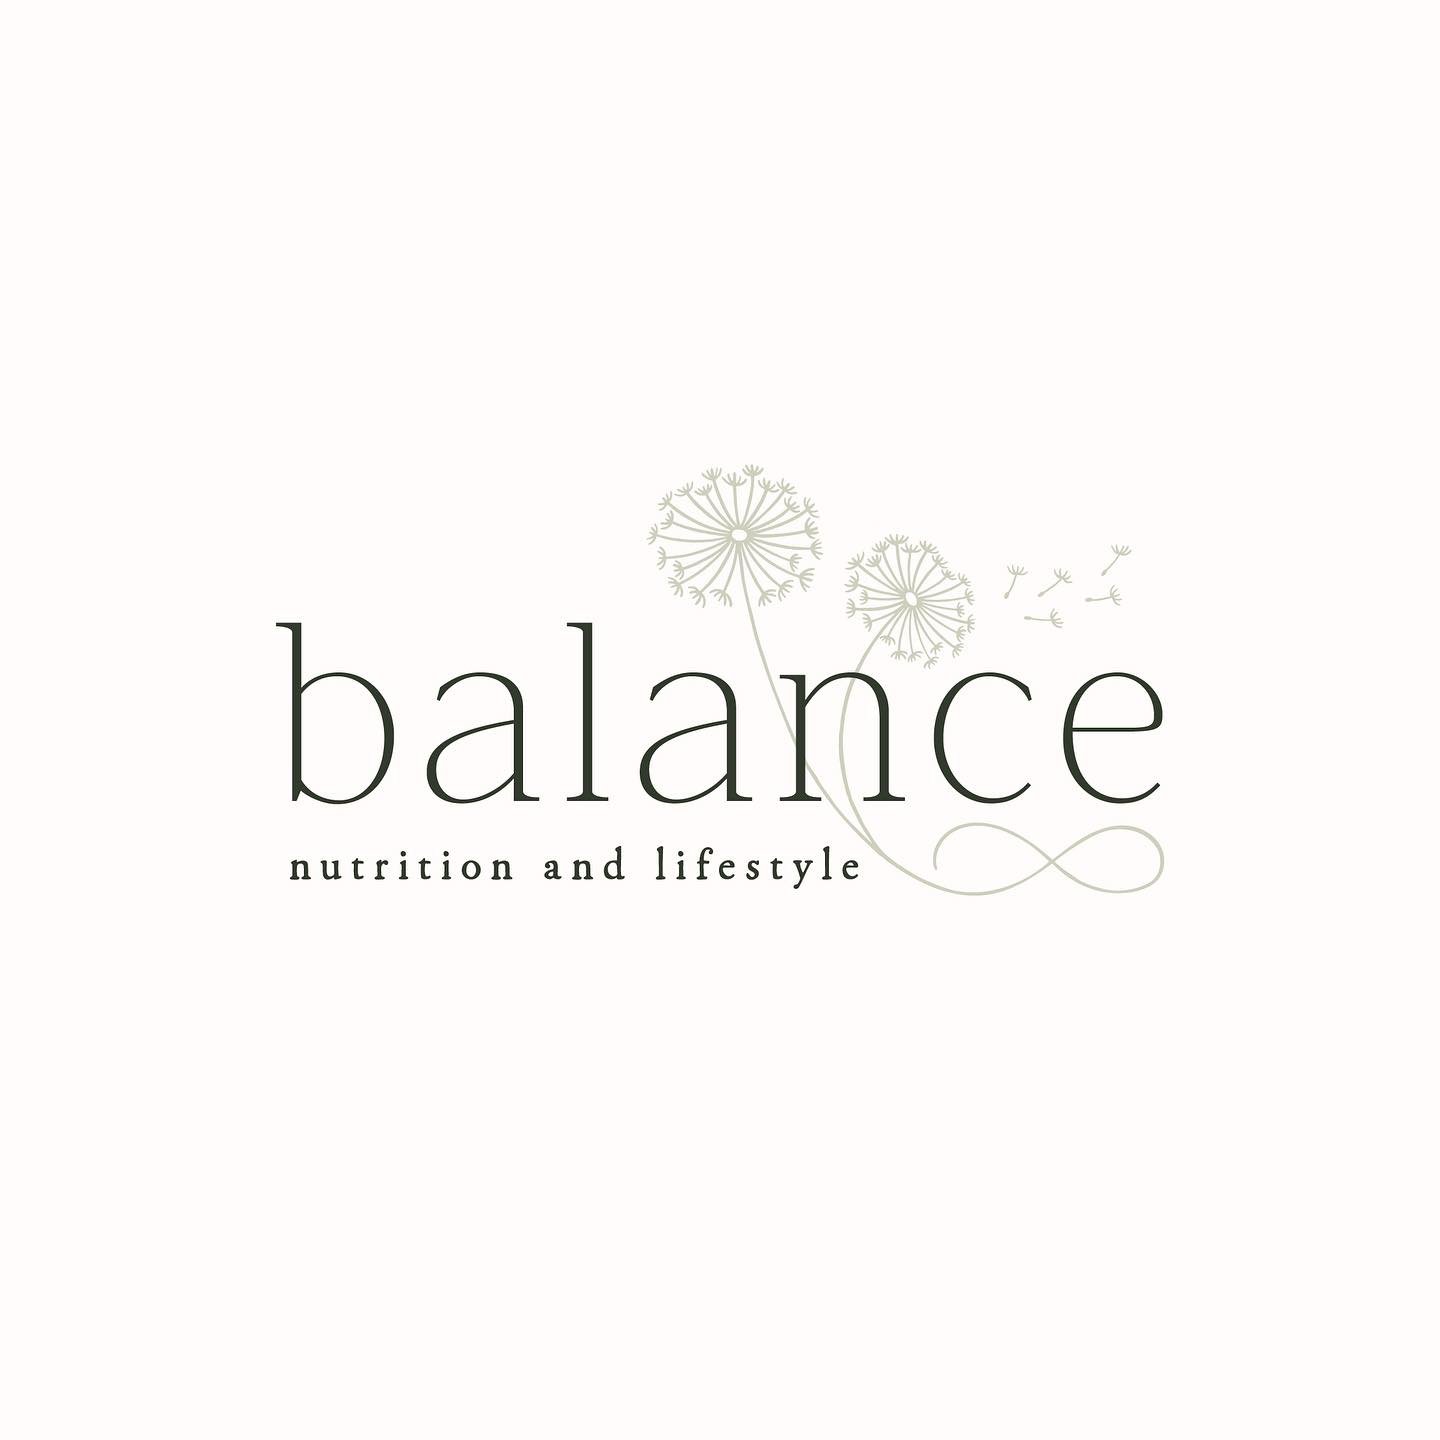 The finished branding I created recently for @balancenutritionlifestyle 🌿 There&rsquo;s a new post up on the blog about this project and the full brand ✨